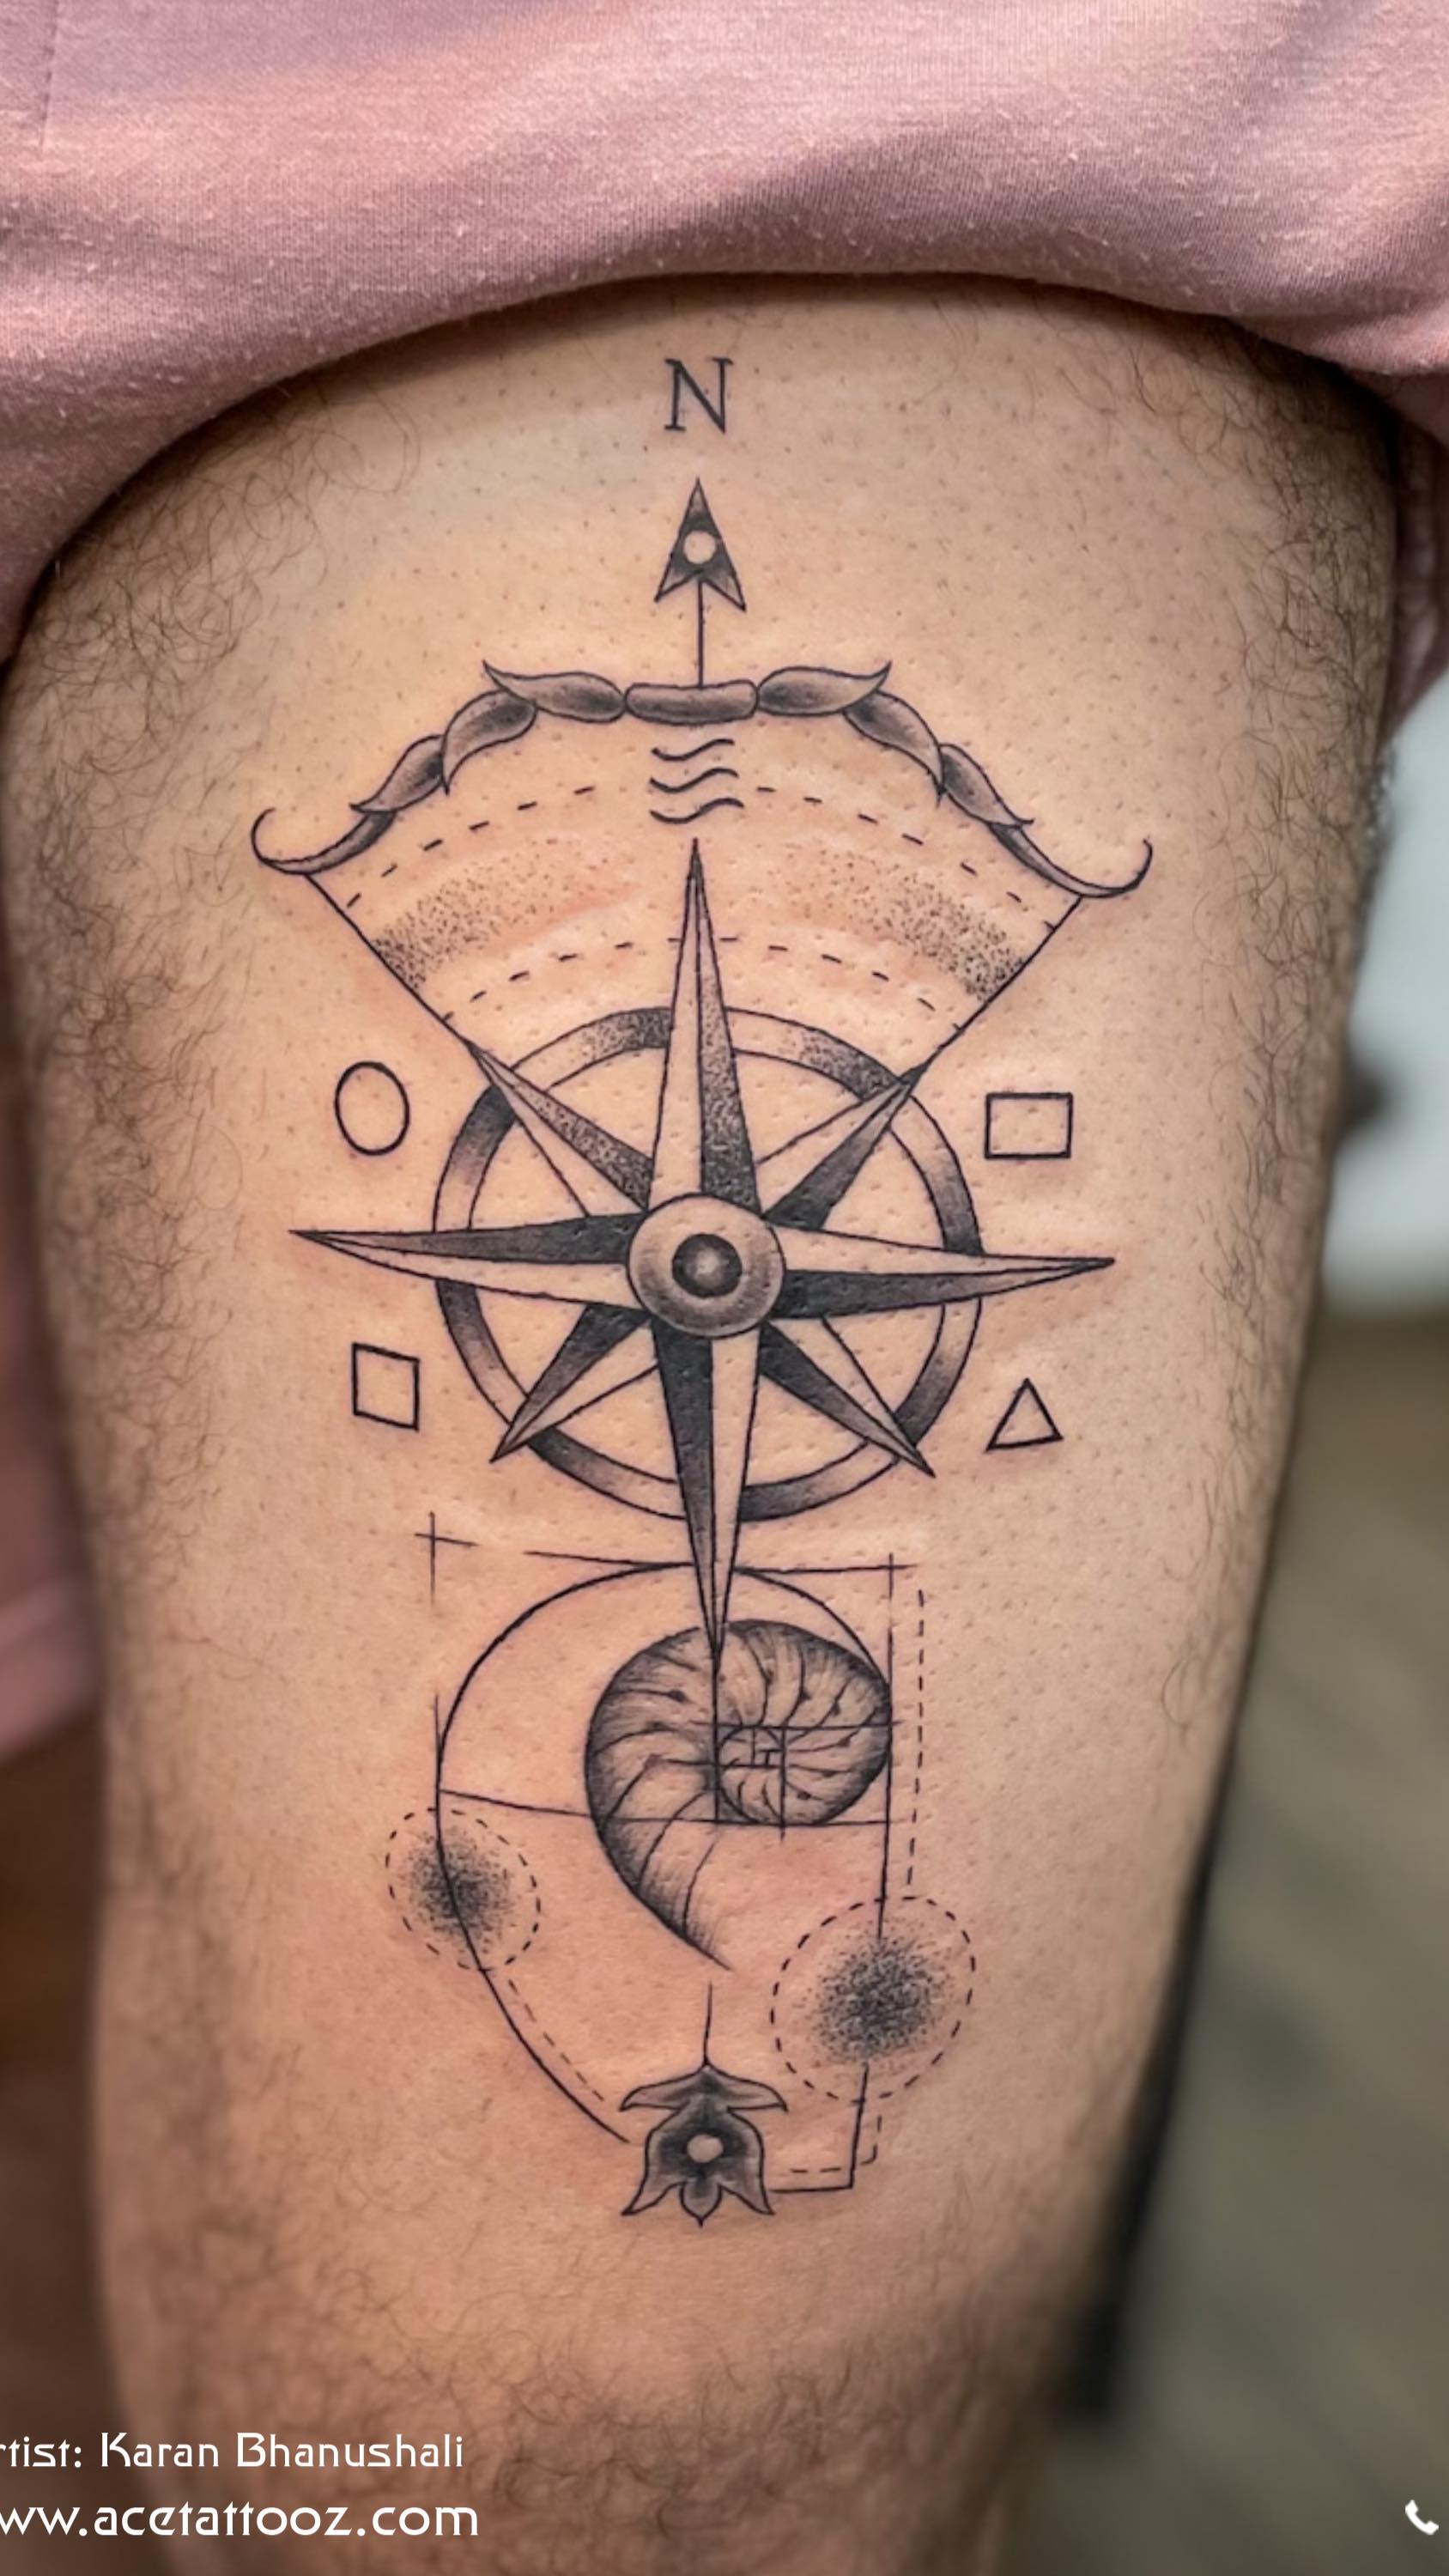 Concept CUSTOM TATTOO 

When your client is a Travel enthusiast & loves his zodiac as he is an Astrologer so the Sun SIGN Sagittarius 
He also wanted the 5 elements of Air water fire earth space 
The design of Golden Ratio for a strong visual through balance and proportion. 
.
Done by @paresh_salvi_ 

#Customtattoo #Concepttattoo #Traveltattoo #Astologicaltattoo #Sagittarioustattoo #Customisedtattoo #5elementstattoo #Goldenratiotattoo #Acetattoozindia #Acetattooz #Bestatttooartistindia #Tattooideas #Tattoodesign #Custometattooideas #Bestcustomisetattoo #Besttattoostudio #Tattooartostindia #Ghatkopartattoos #Colabatattoos #Mumbaitattoos